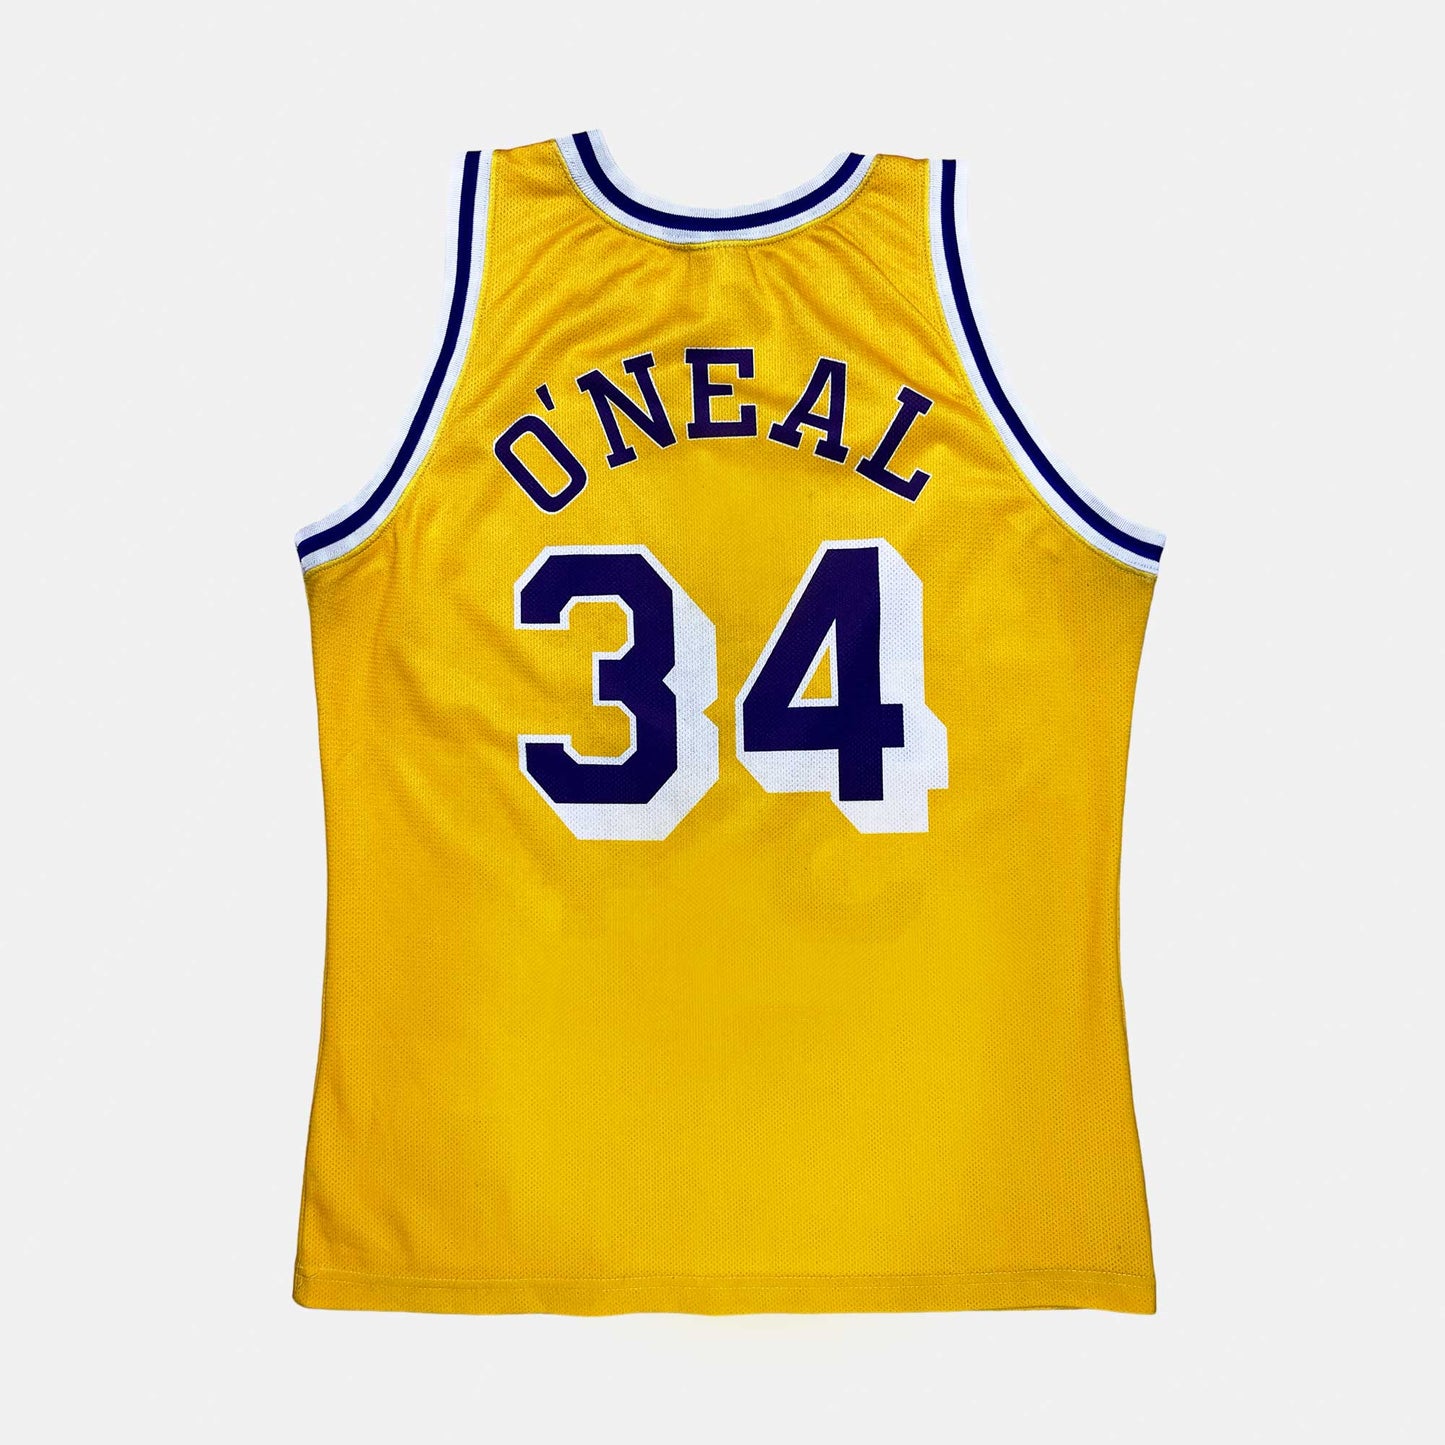 Los Angeles Lakers - Shaquille O’Neal - Größe M - Champion - NBA Trikot